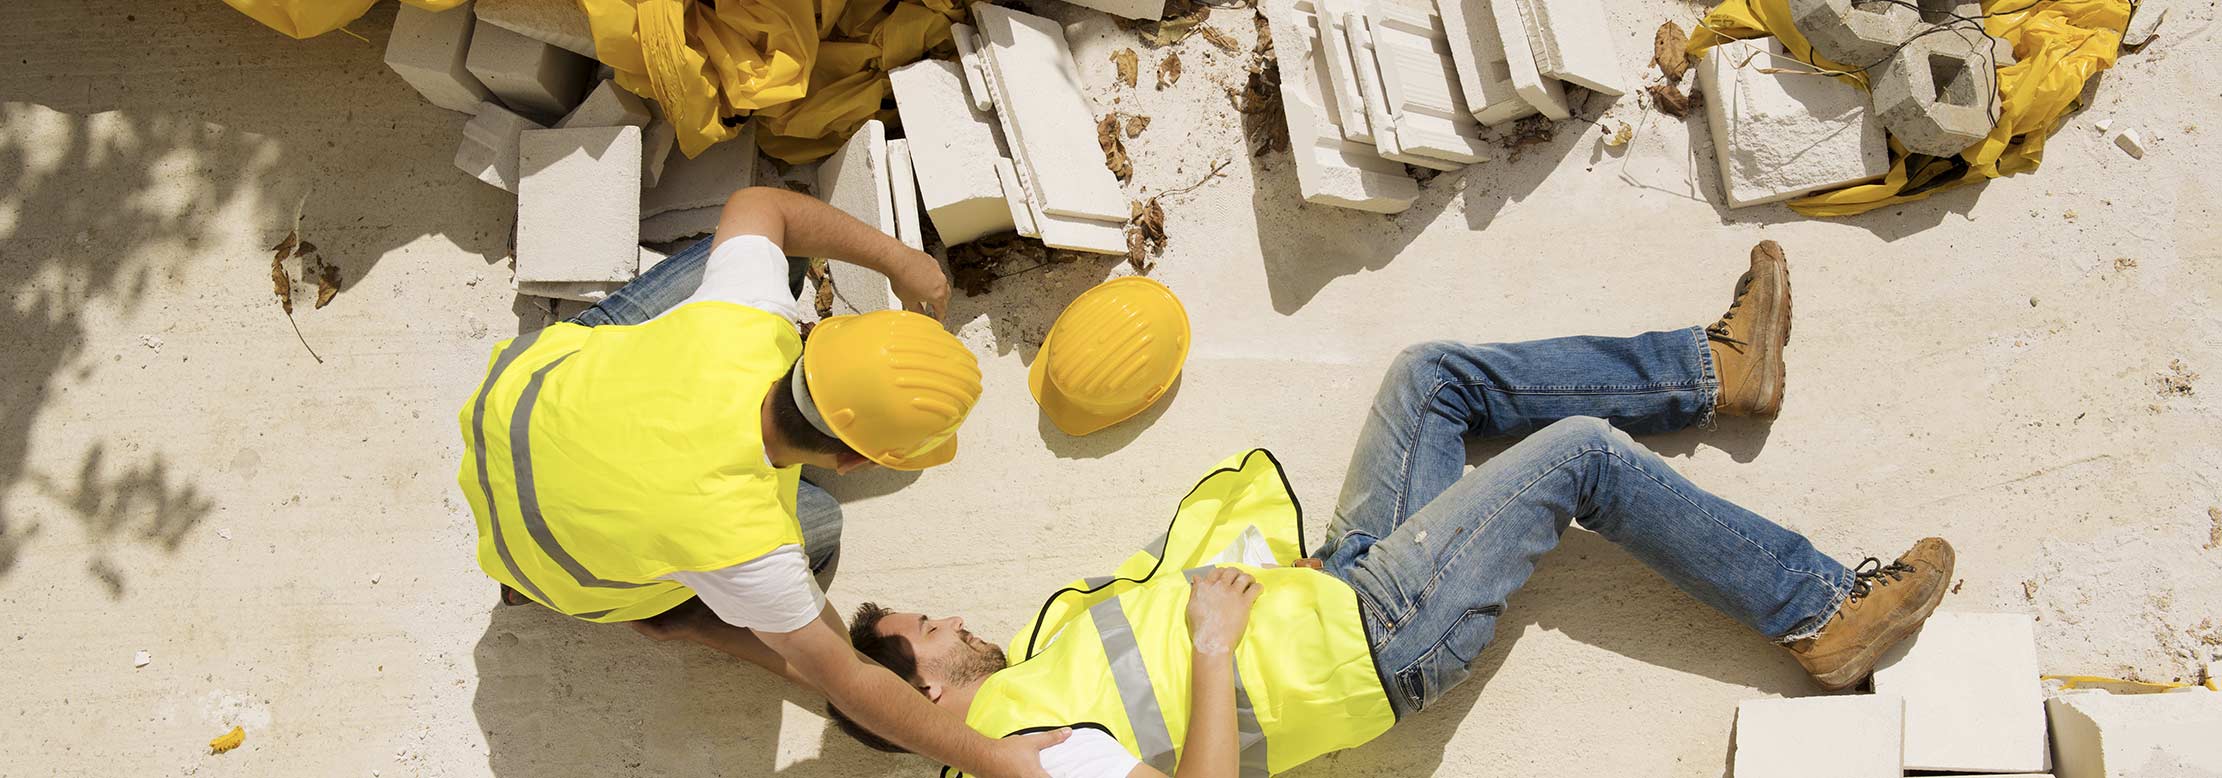 Construction worker lies on ground after getting hurt.